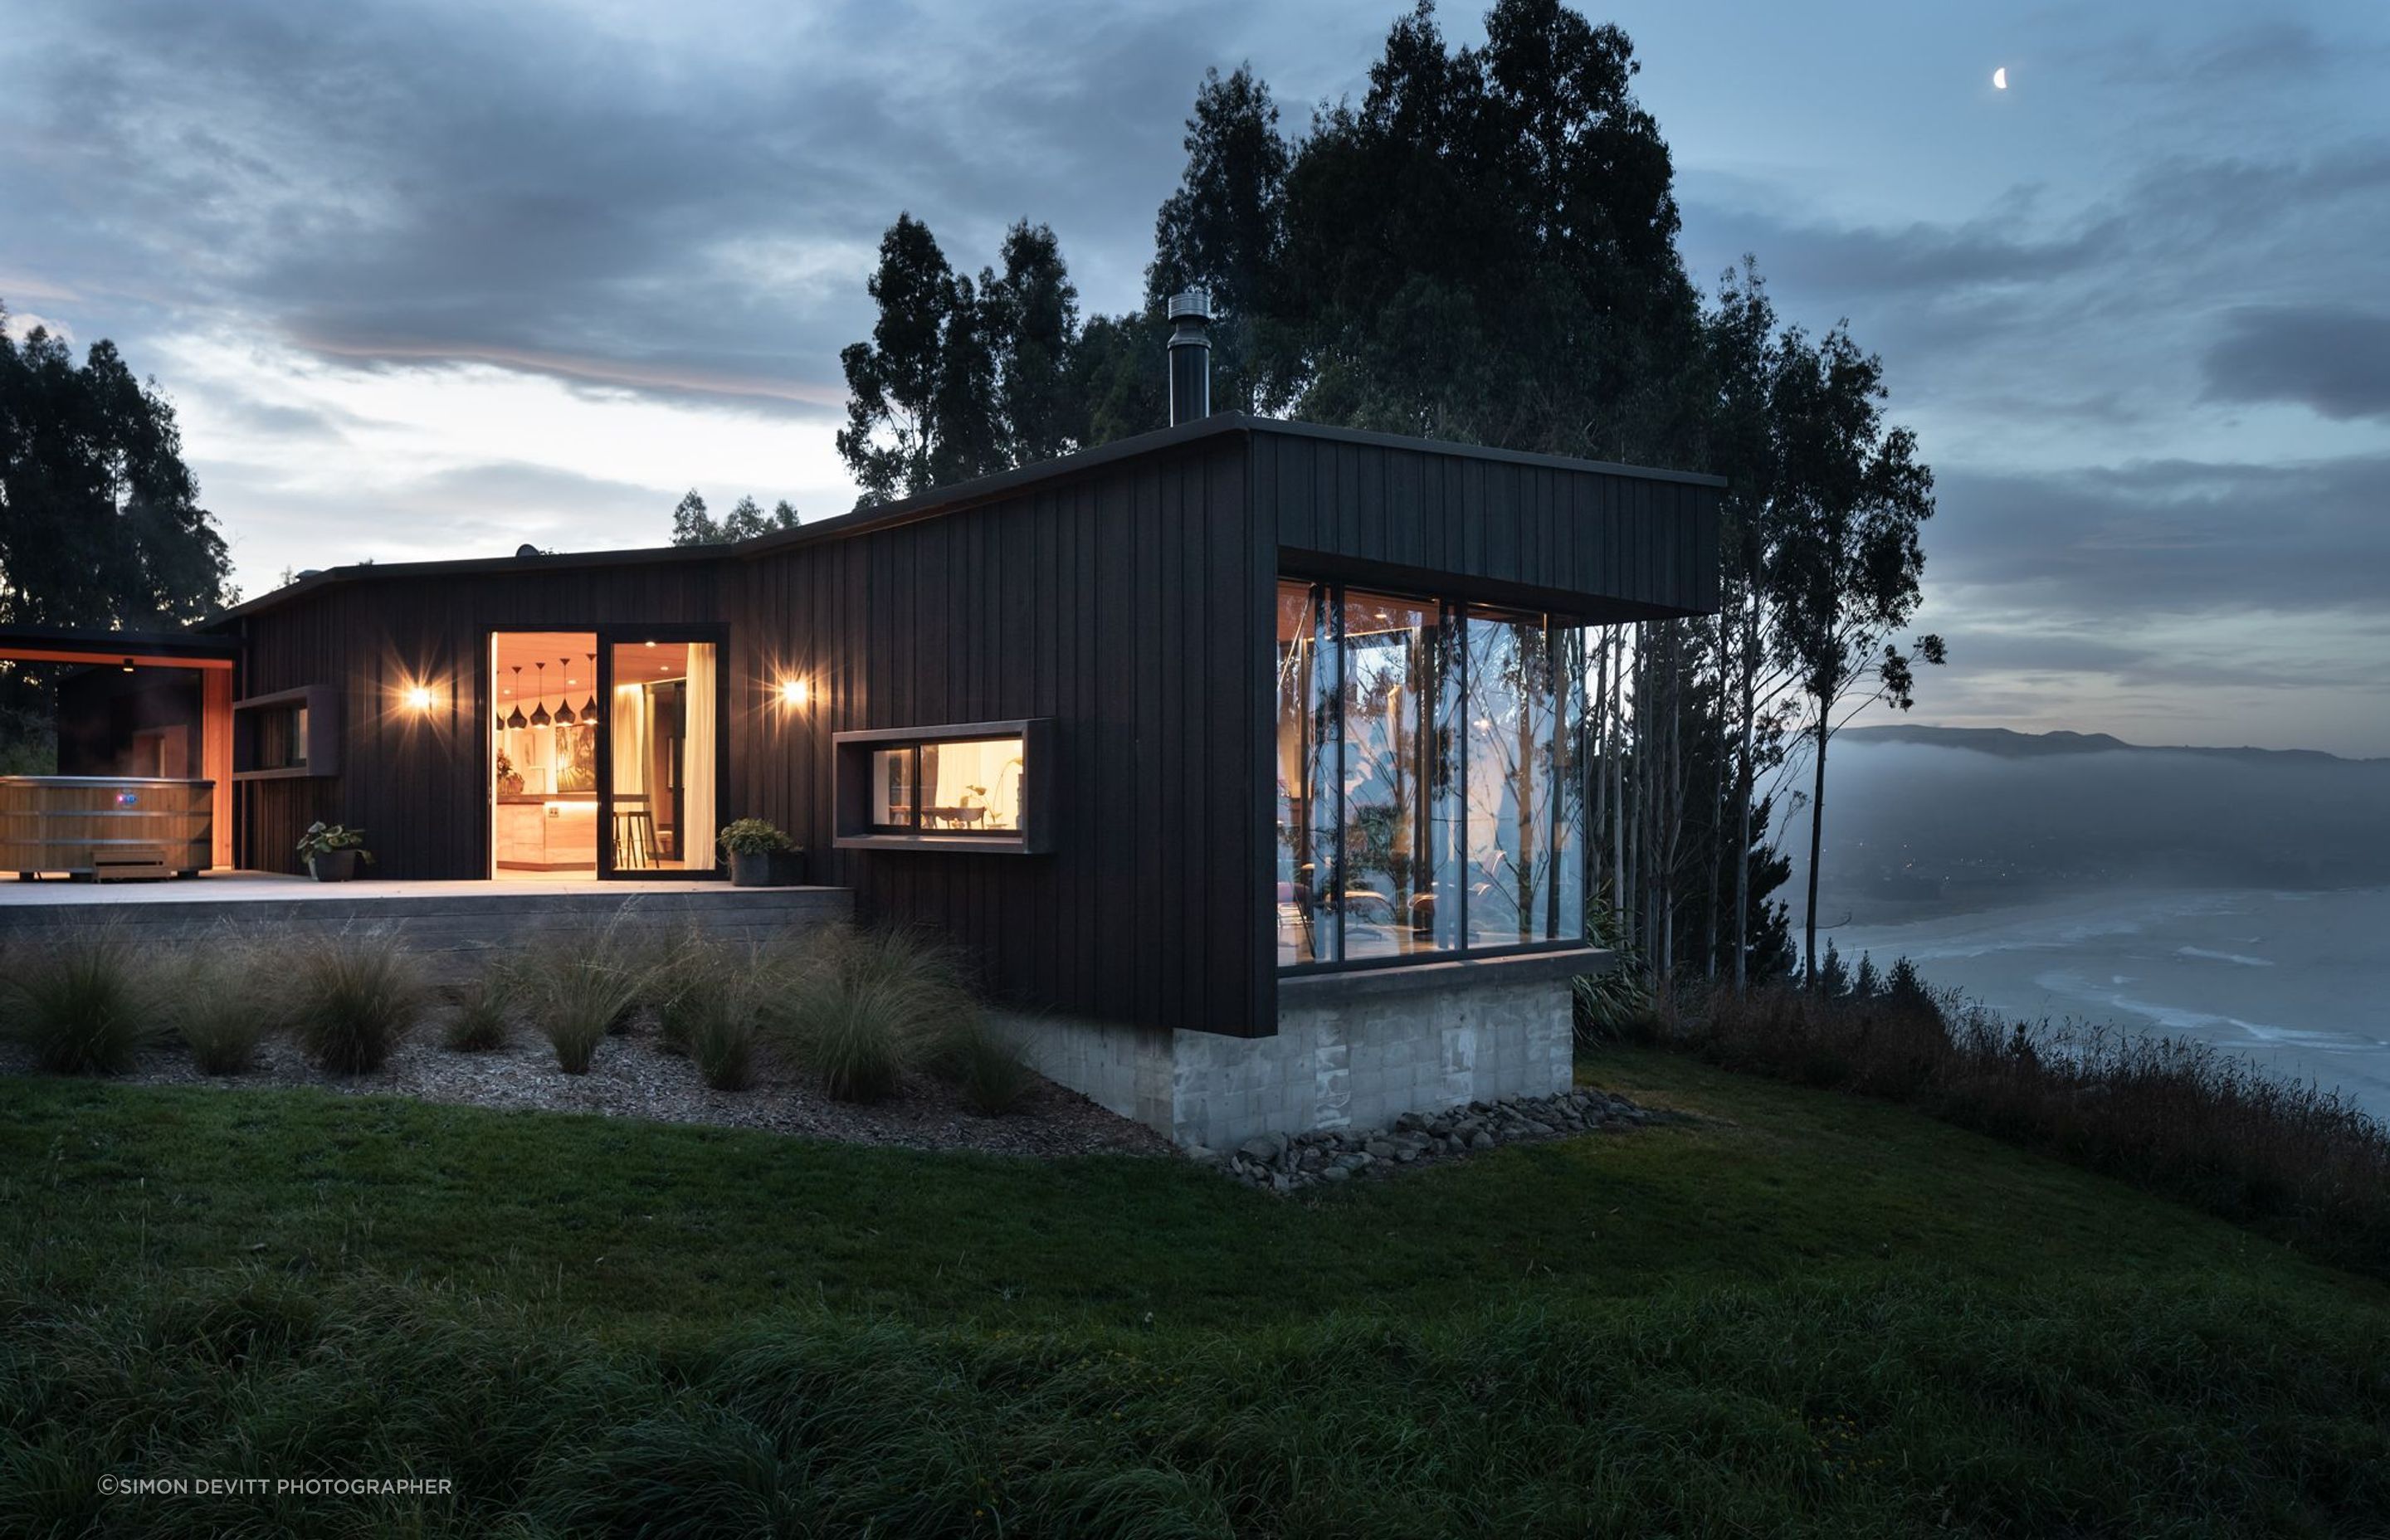 The home's position offers privacy while still taking advantage of the expansive views.